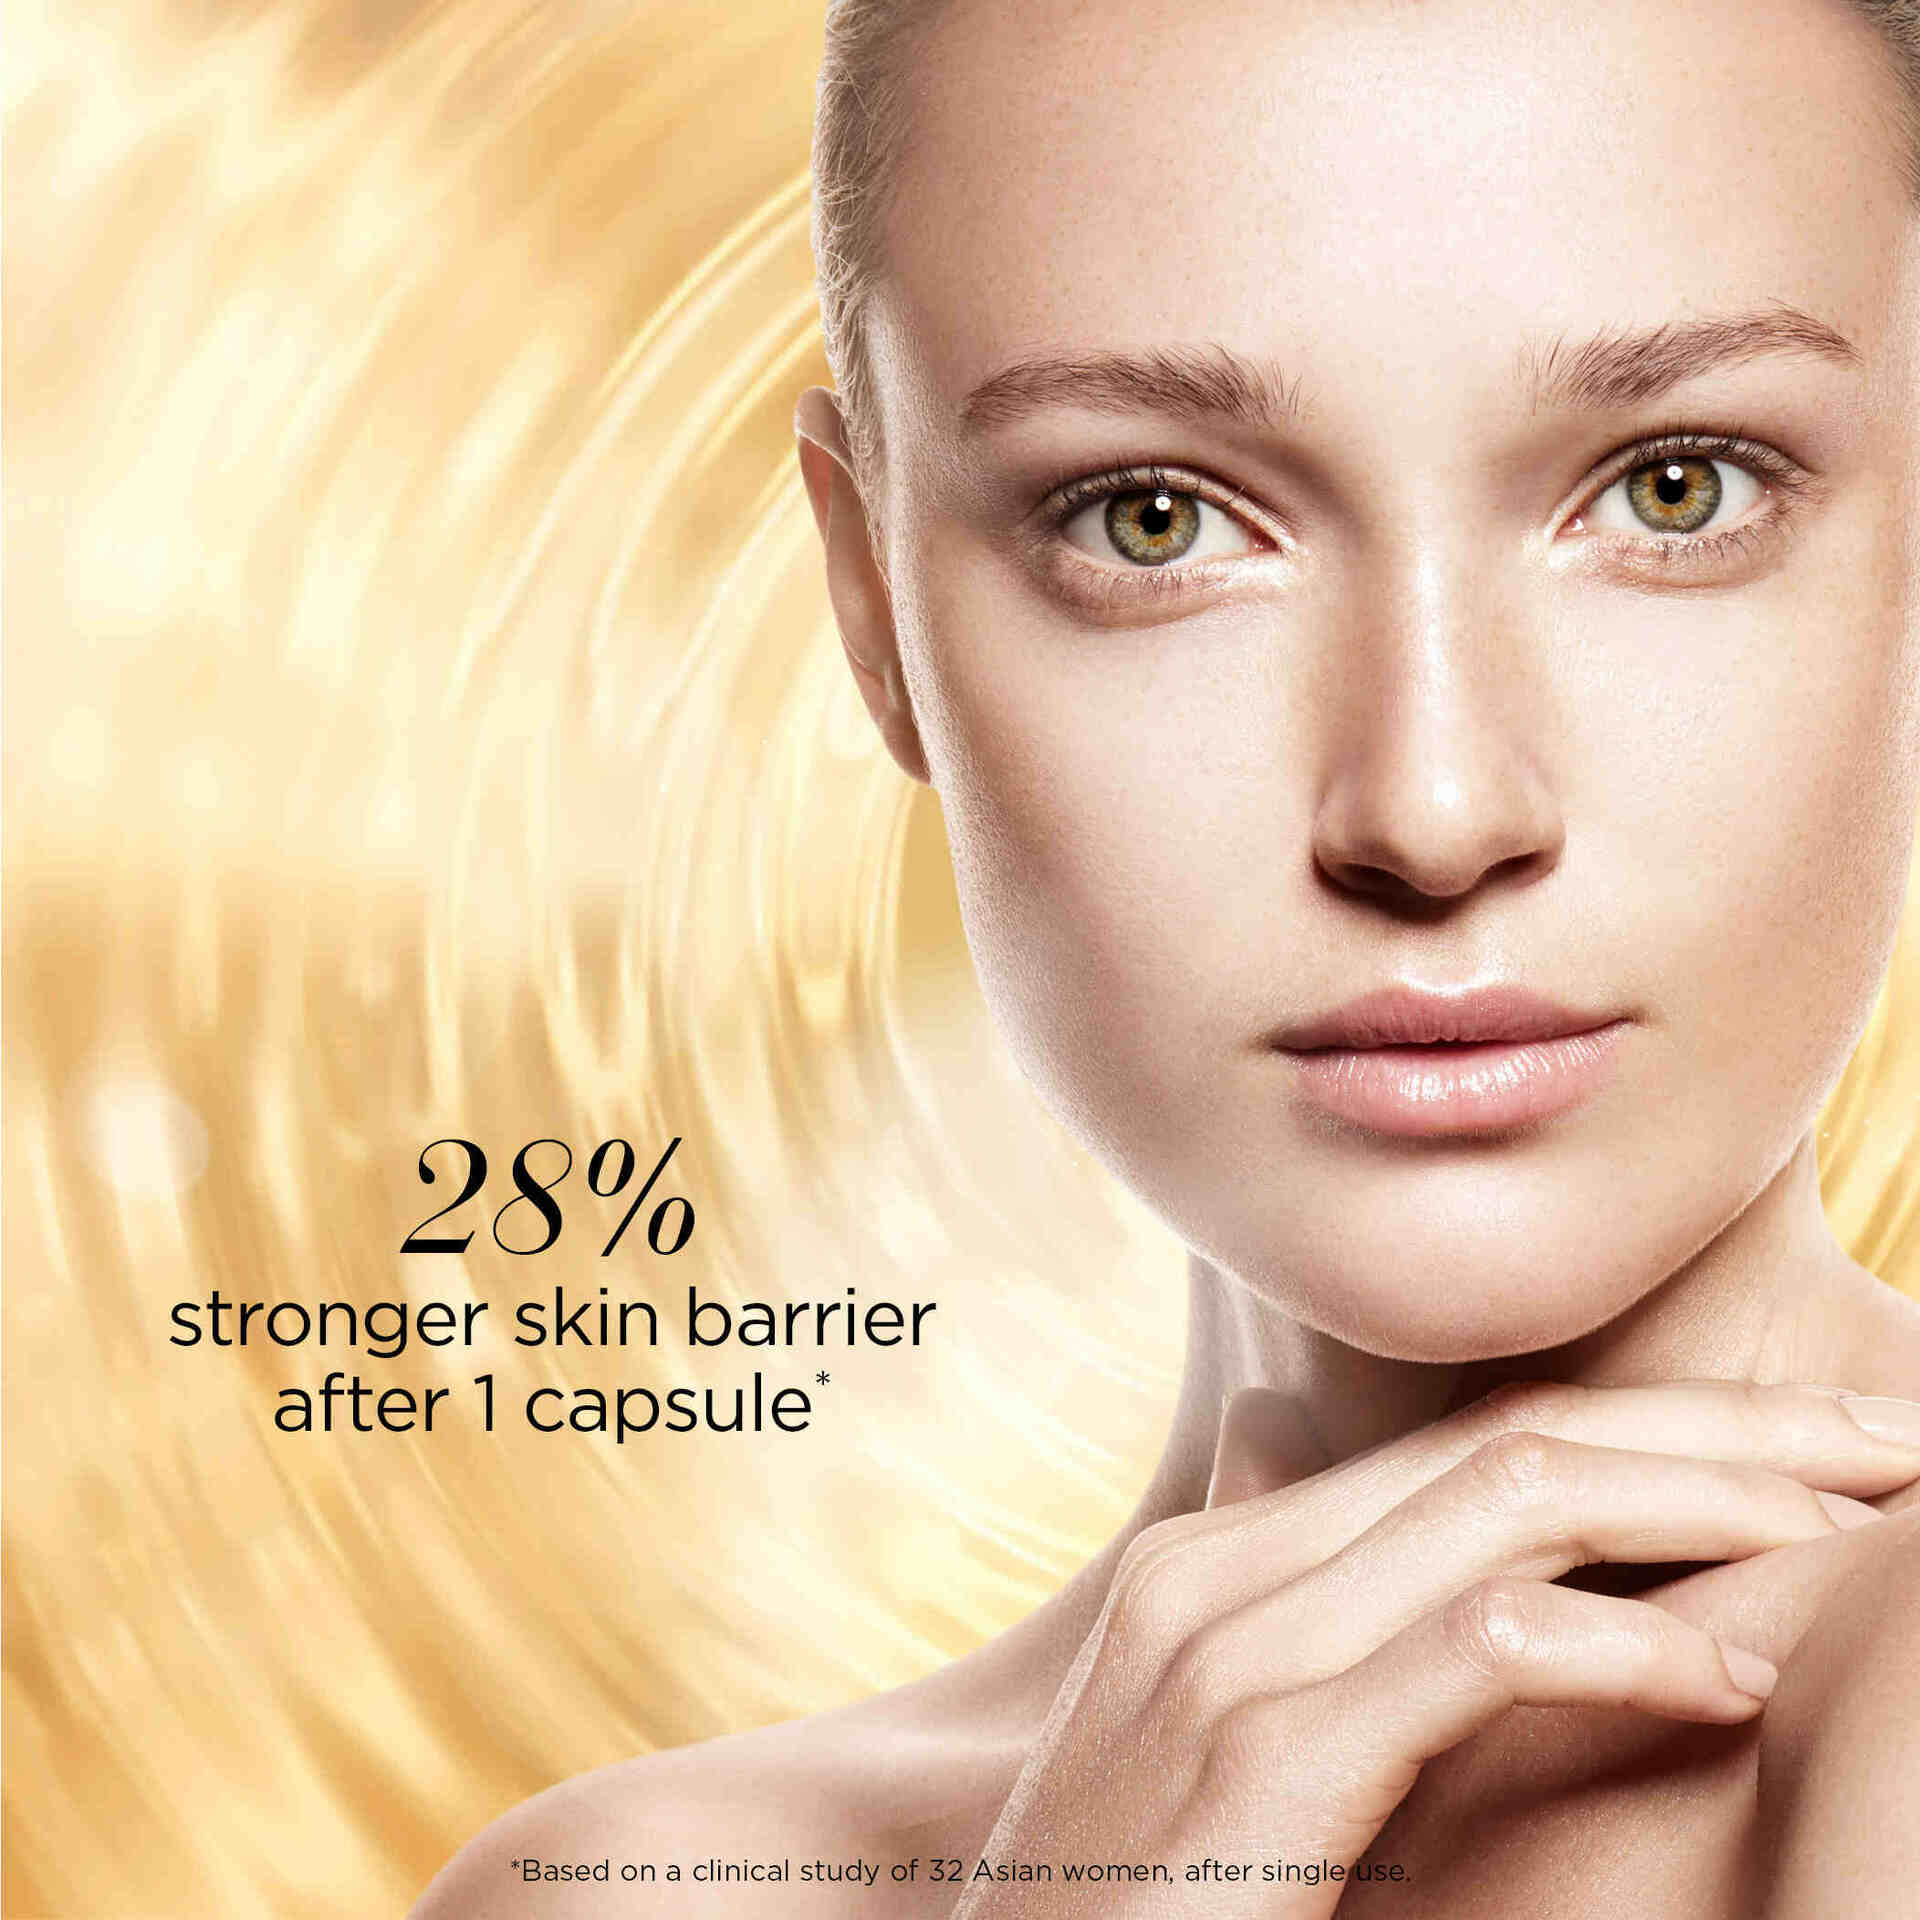 90% saw a dramatic reduction in visible pores after 1 capsule based on a consumer study of 62 Asian women, after single use.